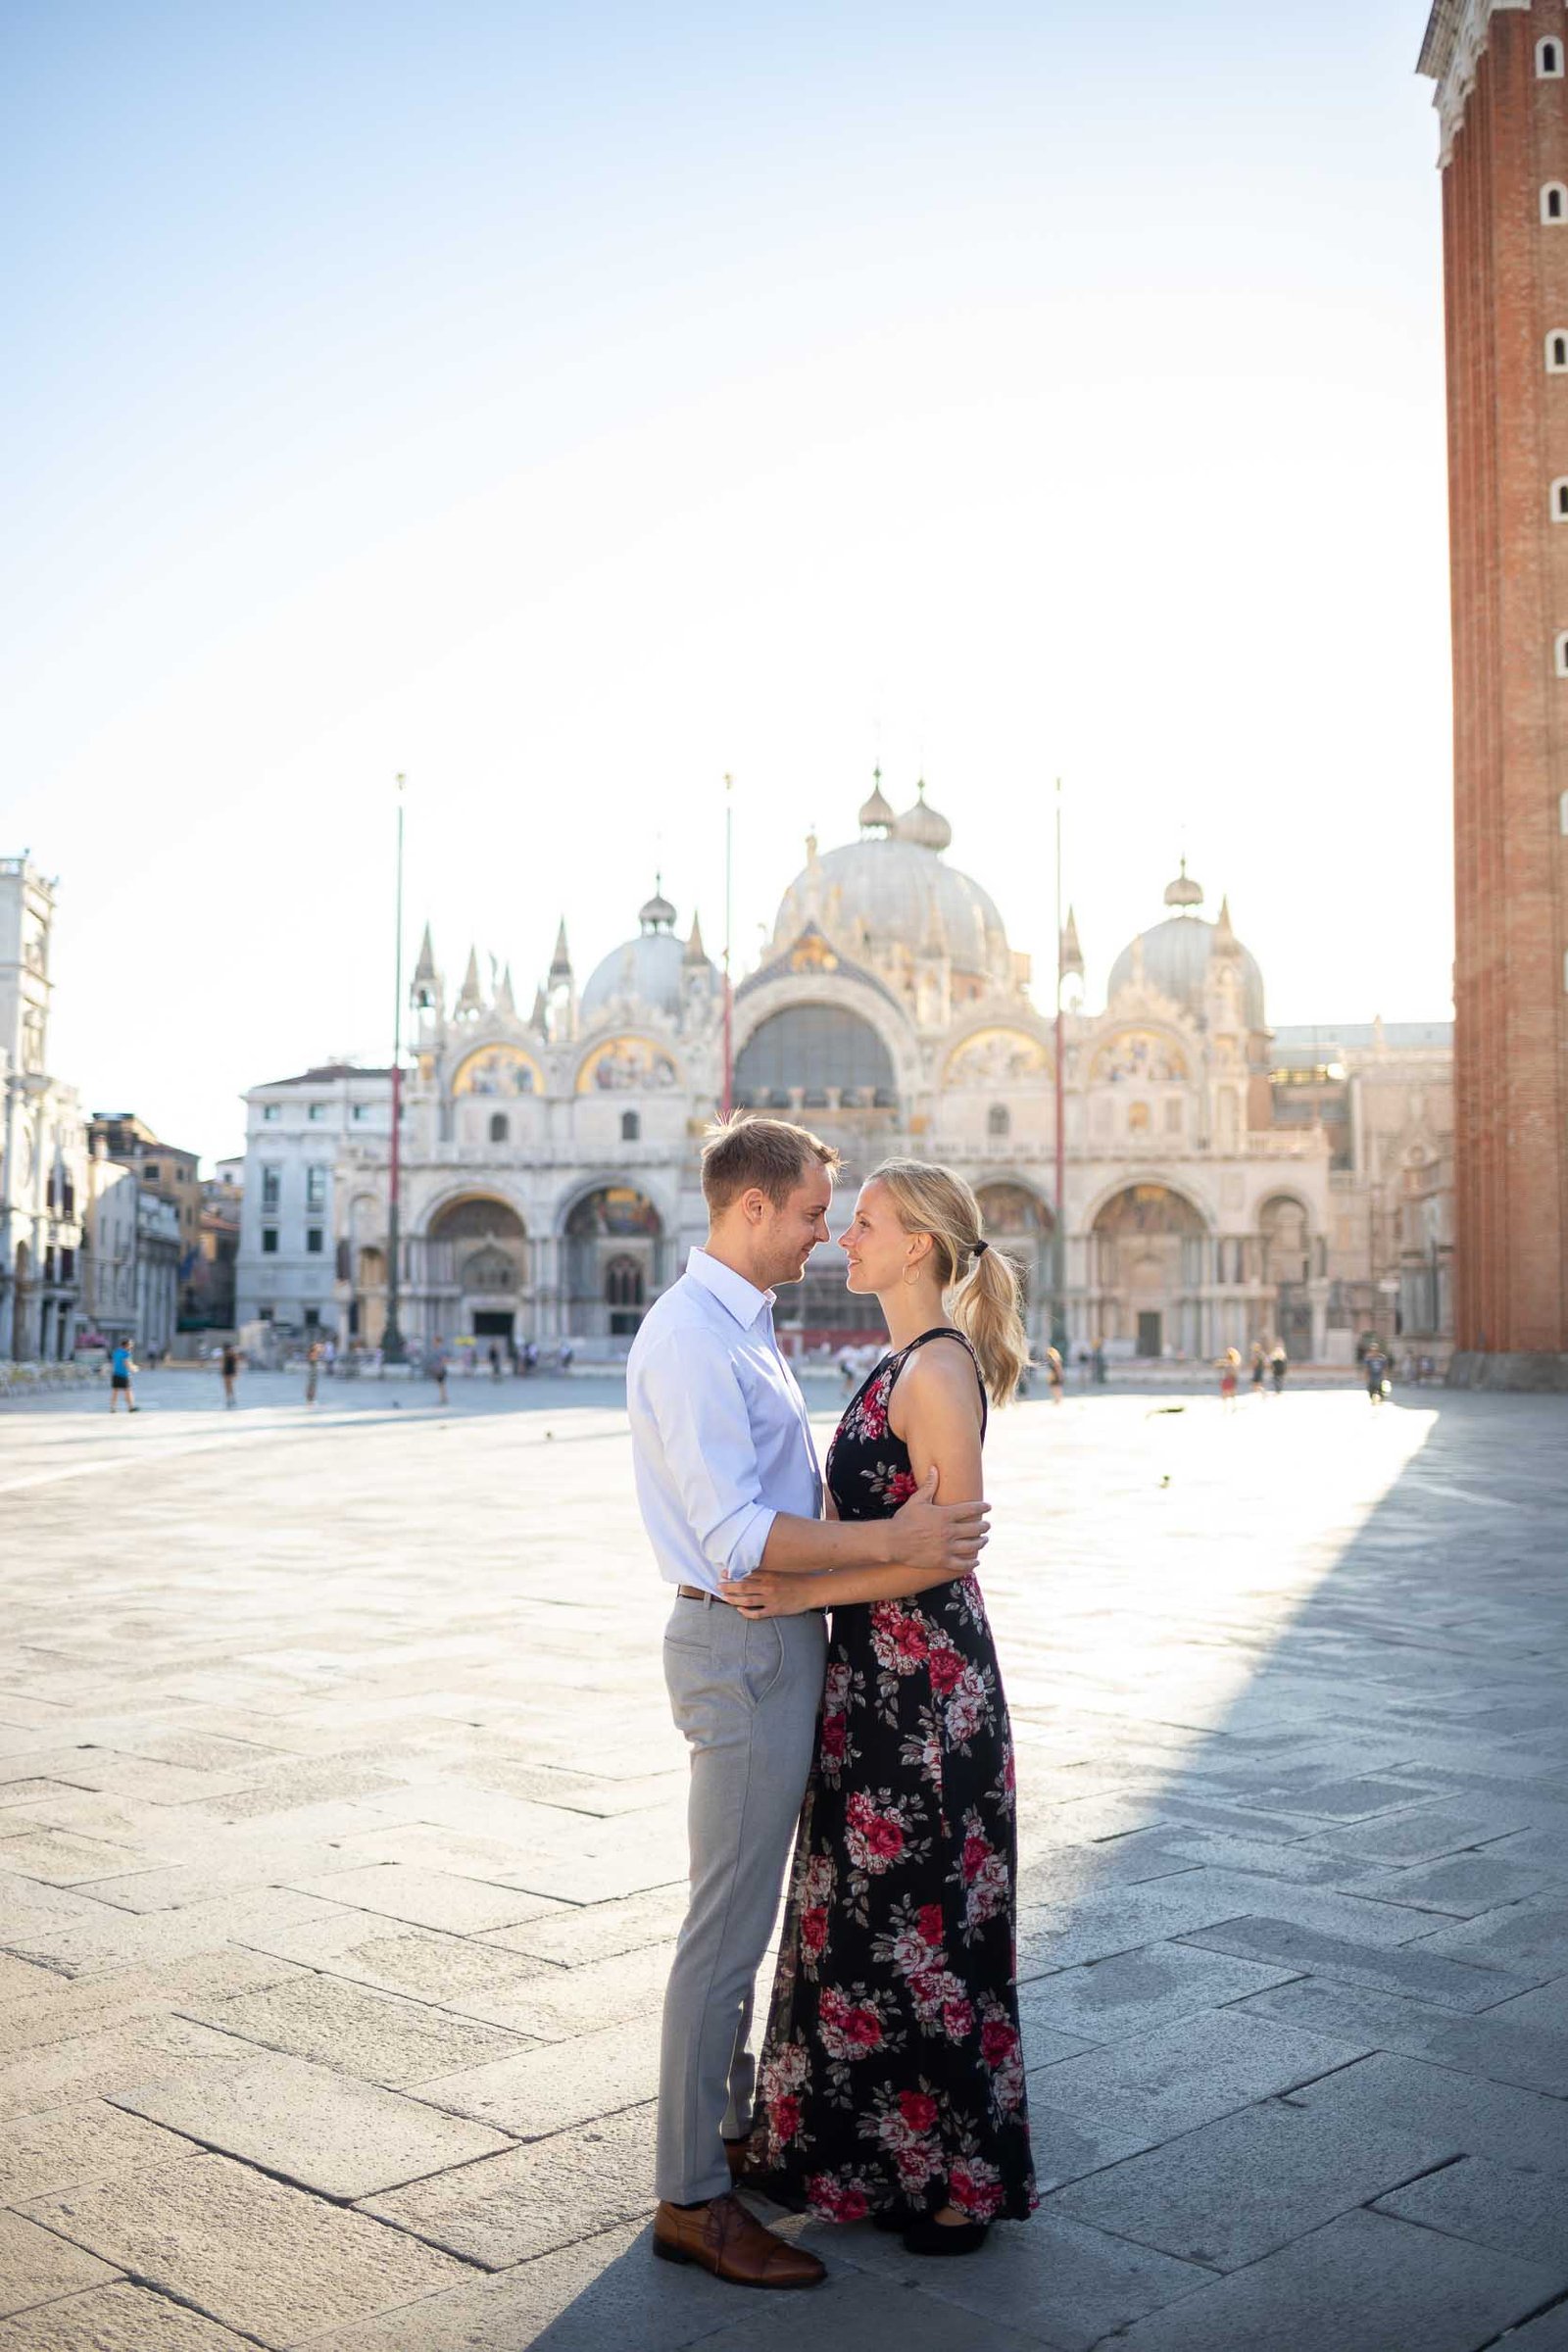 Professional Portrait Photography in Venice for Tourists